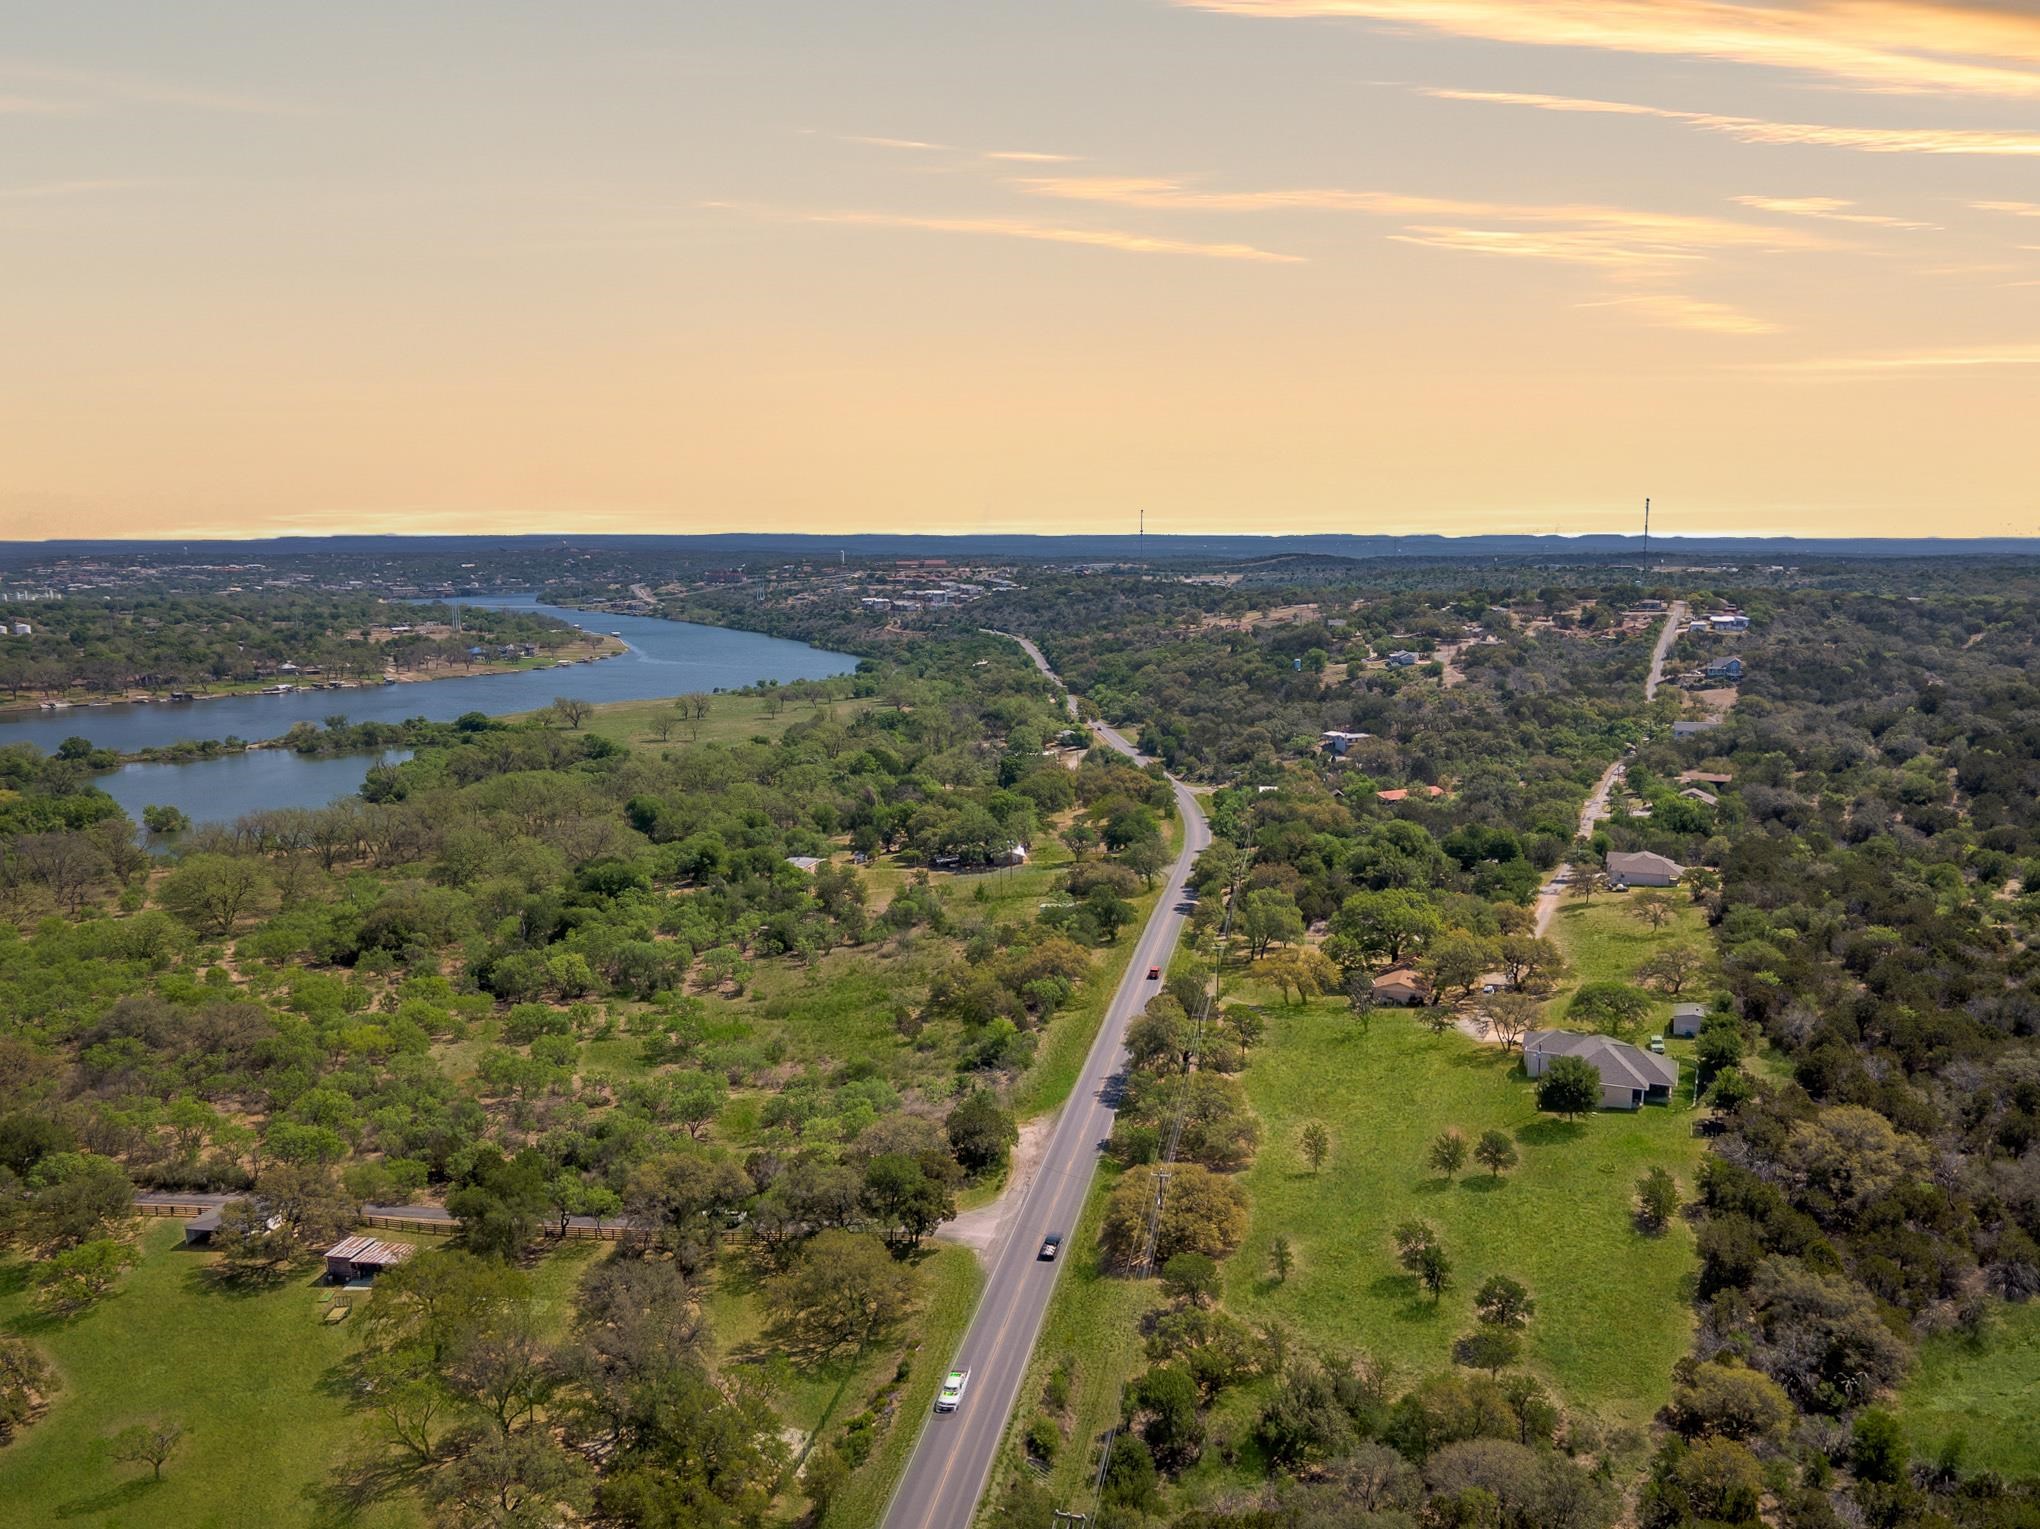 Build your dream home or investment property in Channel Oaks - located on the outskirts of Marble Falls, Cottonwood Shores, and Horseshoe Bay. Marble Falls ISD. The subdivision has exclusive private access to Lake Marble Falls as well as a 25 acres homeowner park. Inquire about five surrounding lots also available for sale. Link to Channel Oaks POA: https://www.co2poa.org/